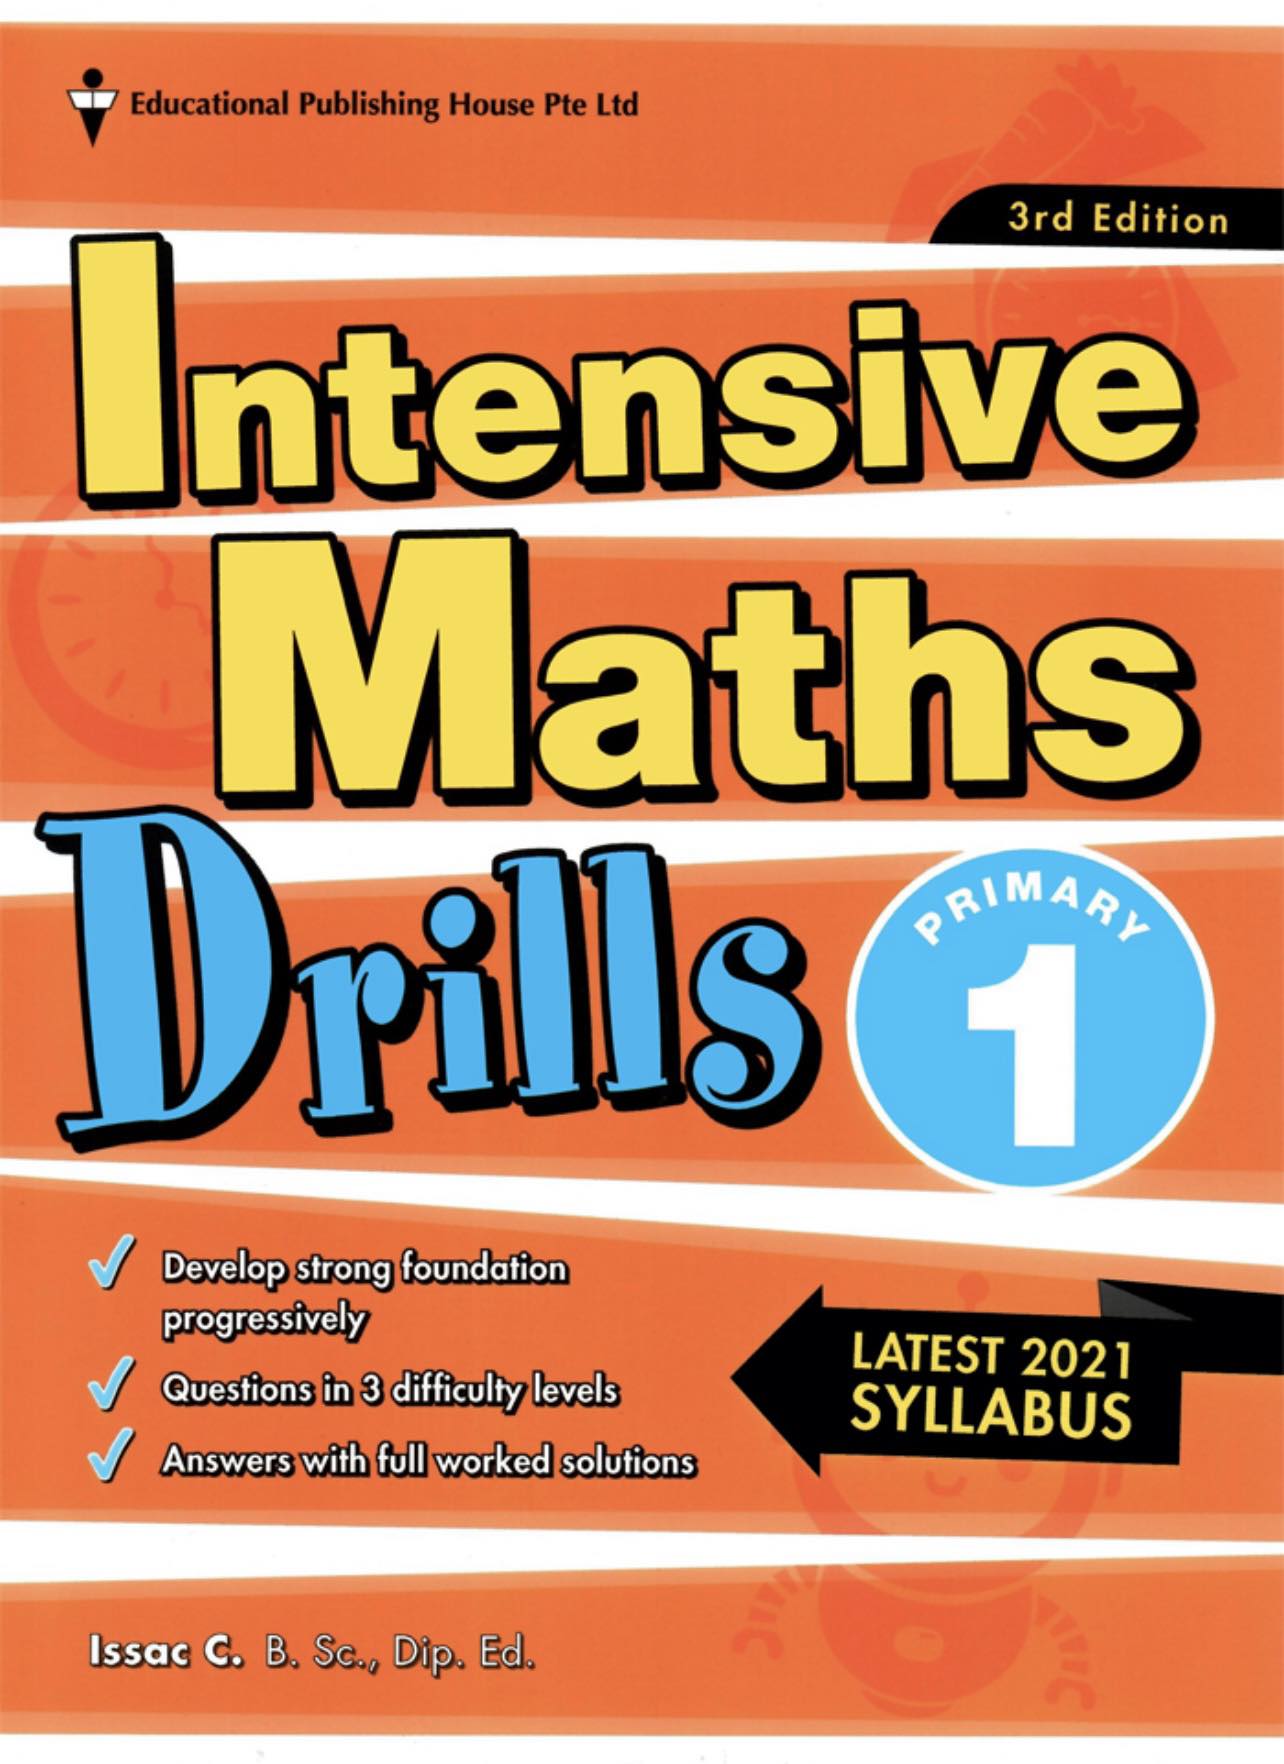 Intensive Maths Drills for Primary Levels